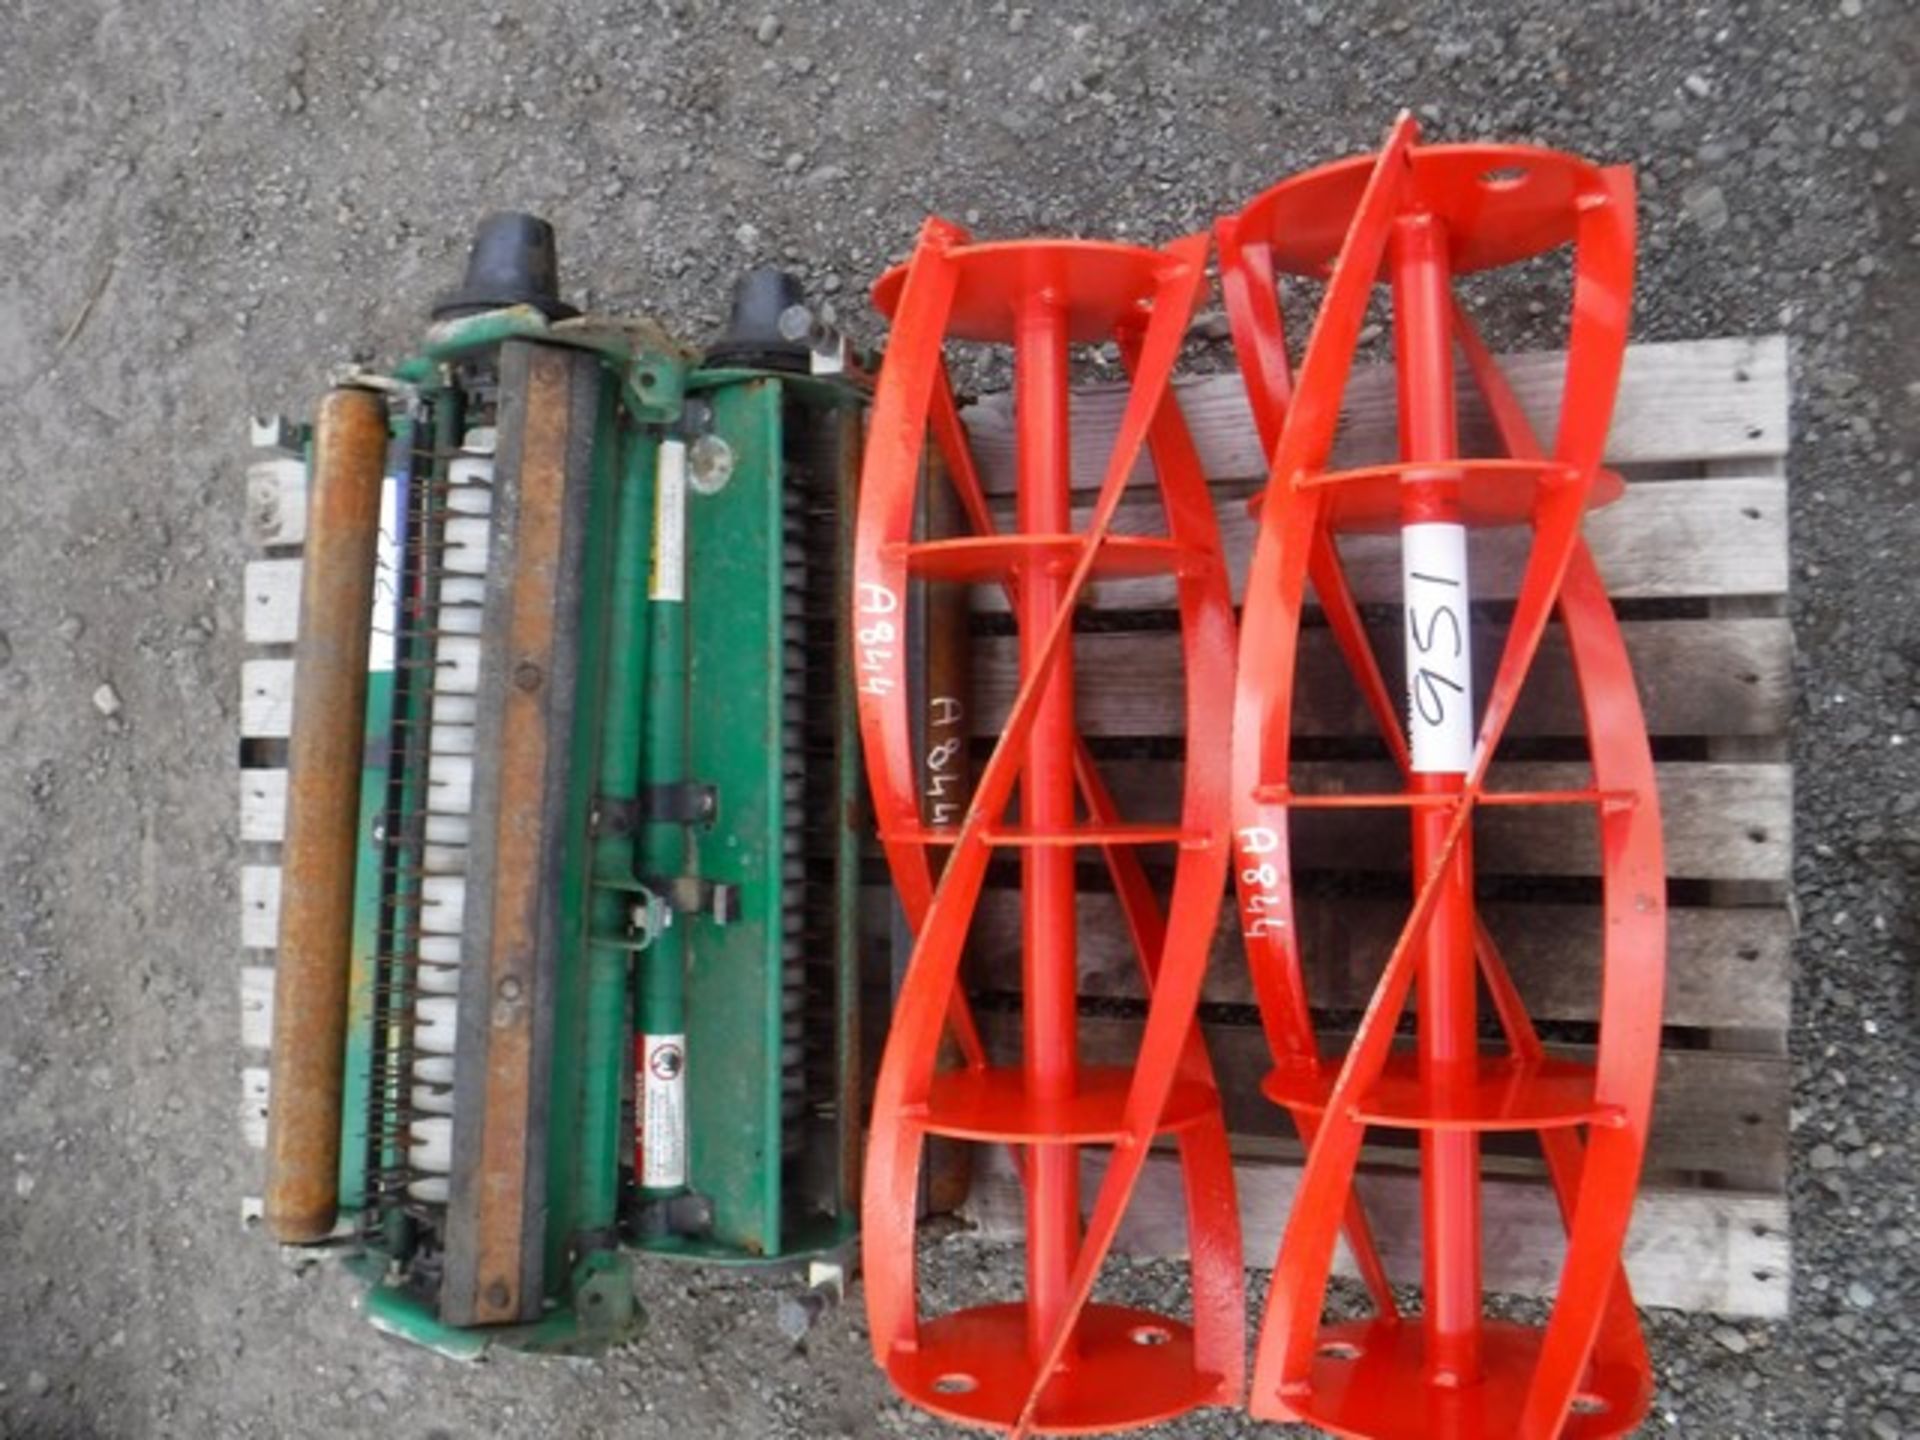 RANSOMES TEXTROW scarifiers & 2 new cylinder/ blades for Ransomes 2250.